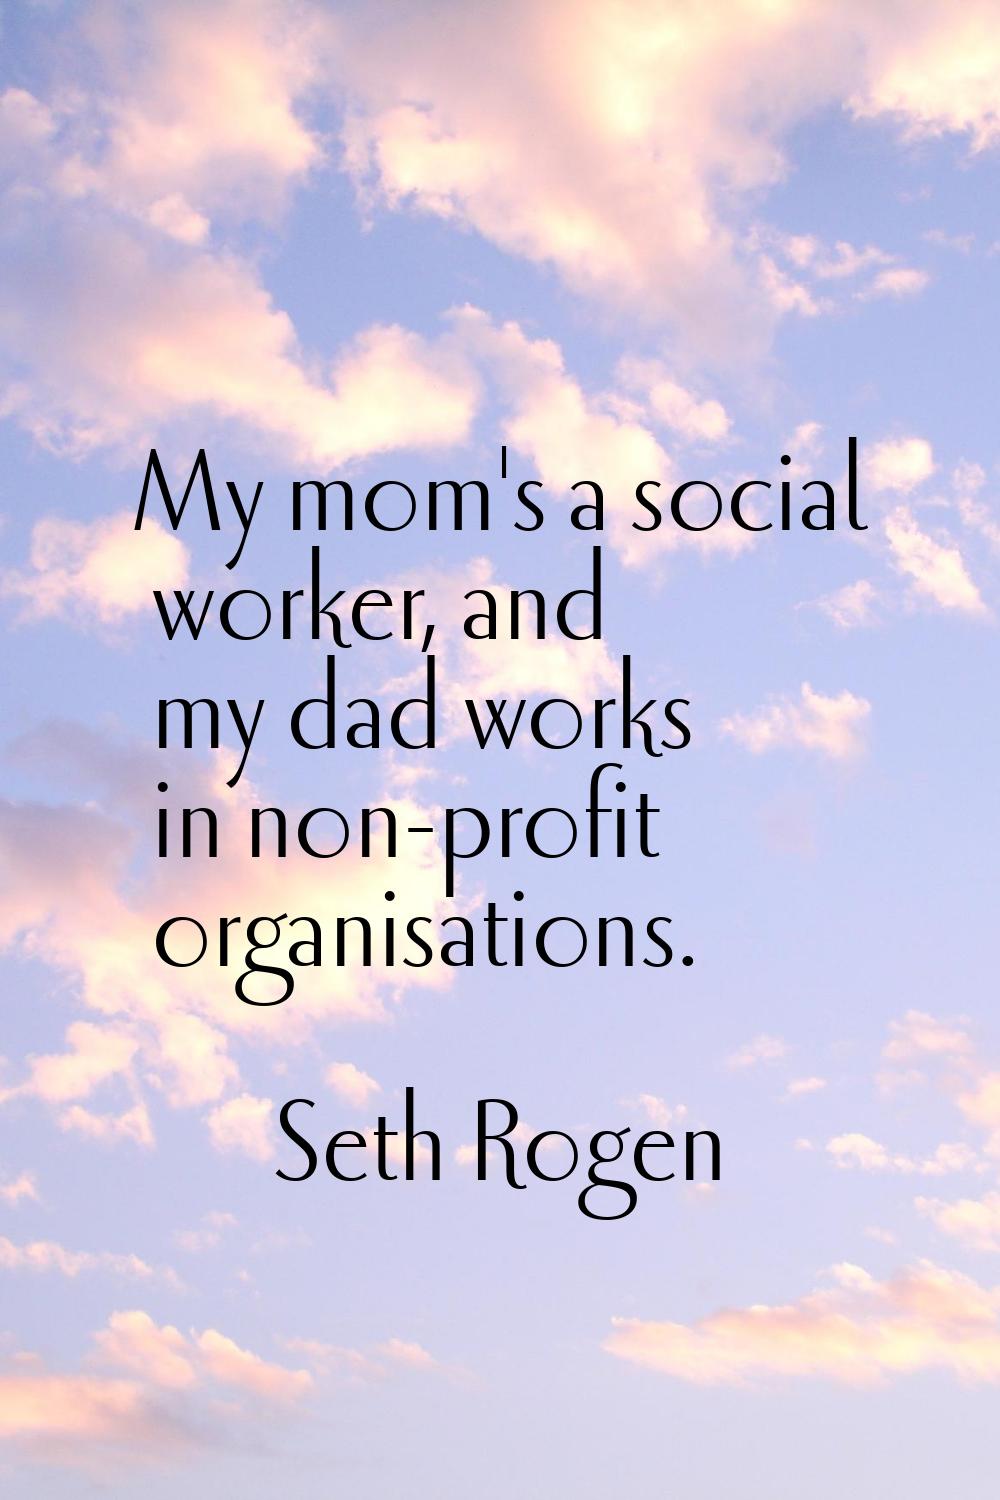 My mom's a social worker, and my dad works in non-profit organisations.